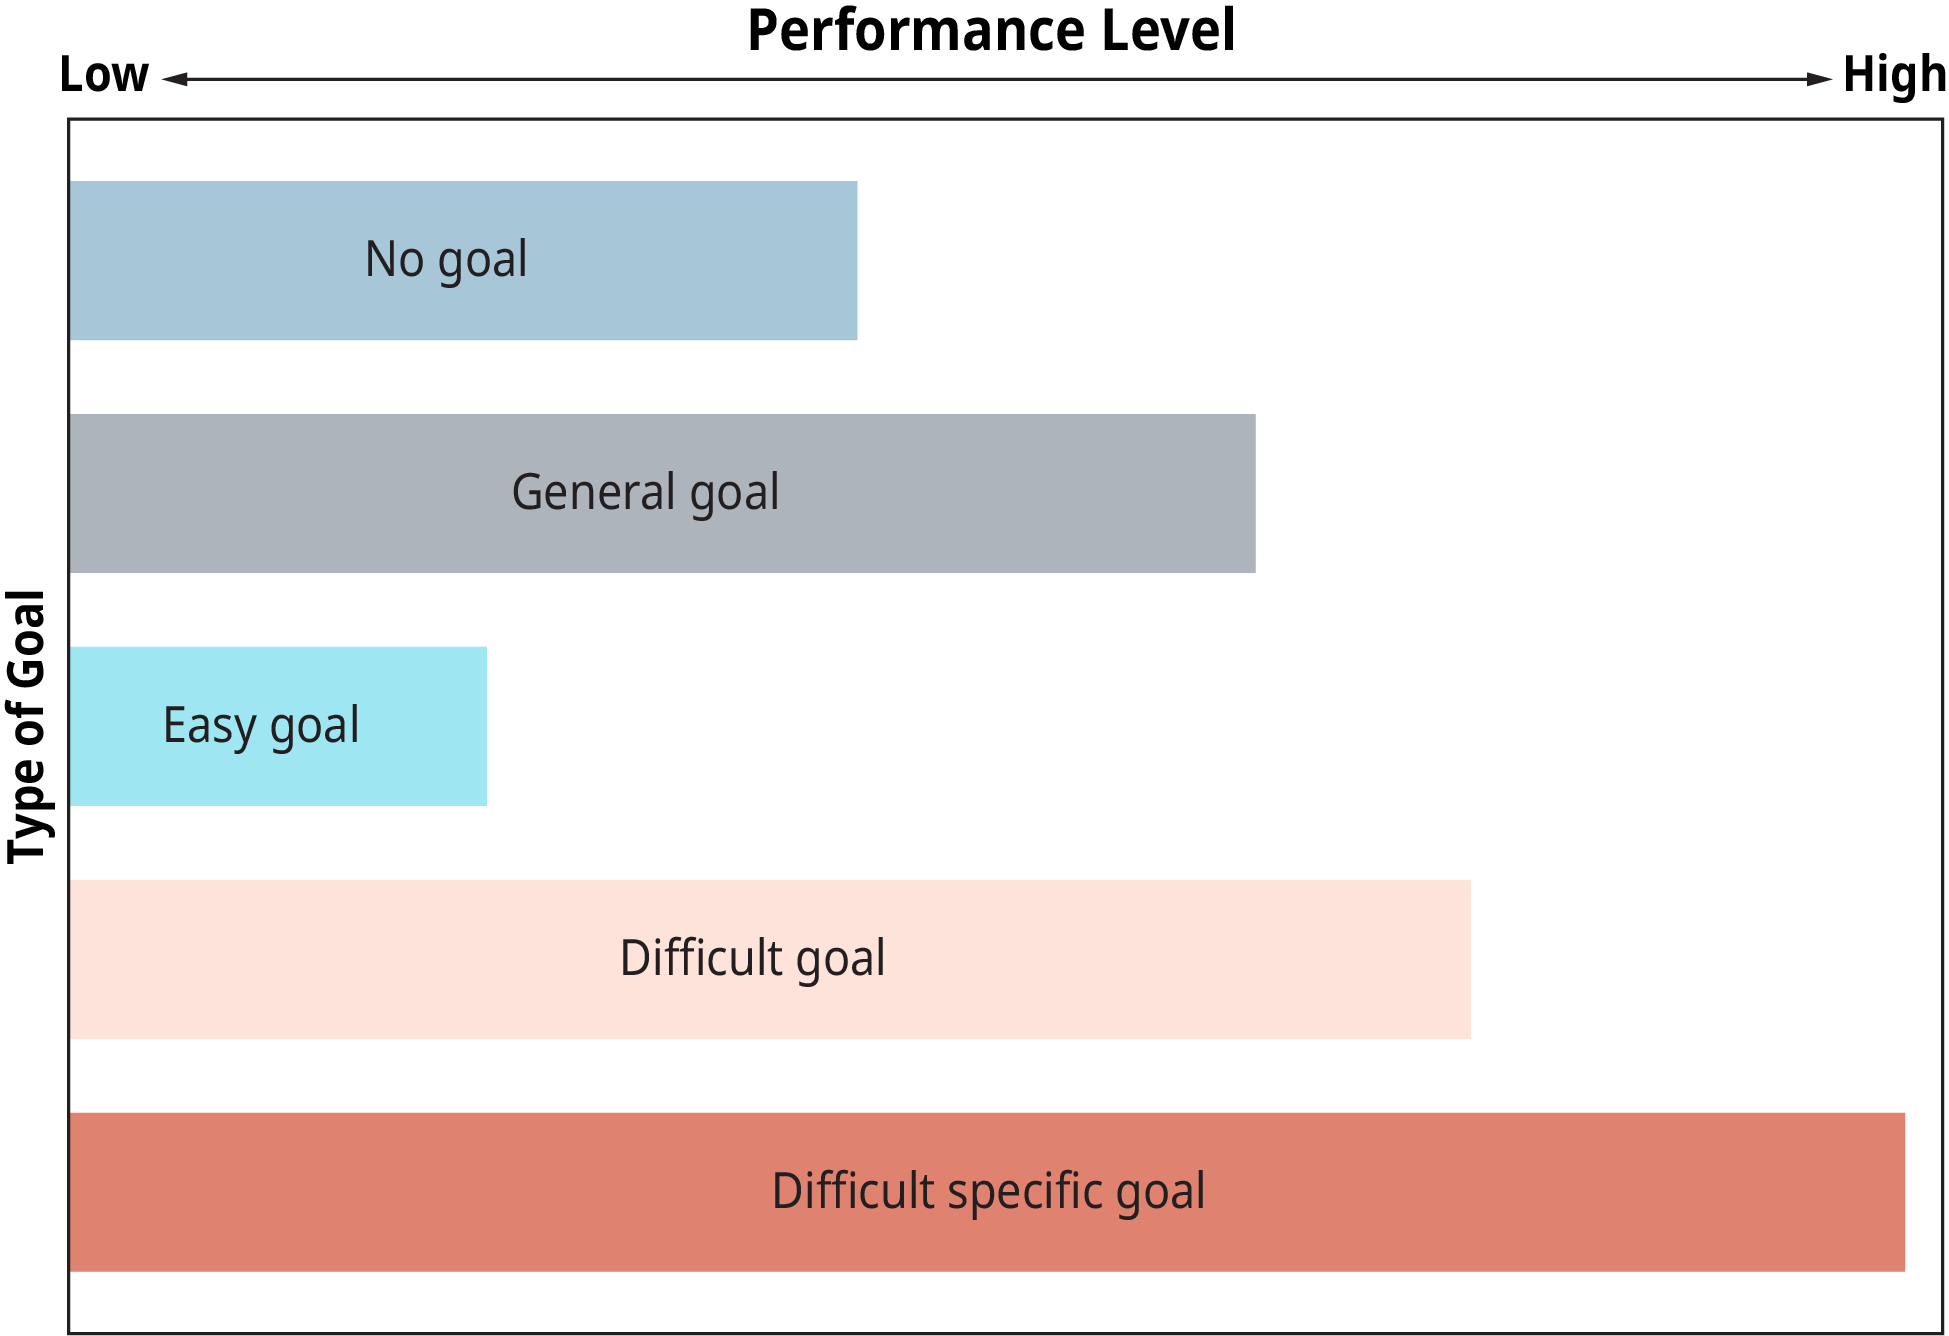 A graphical representation illustrates the effects of type of goal on performance.